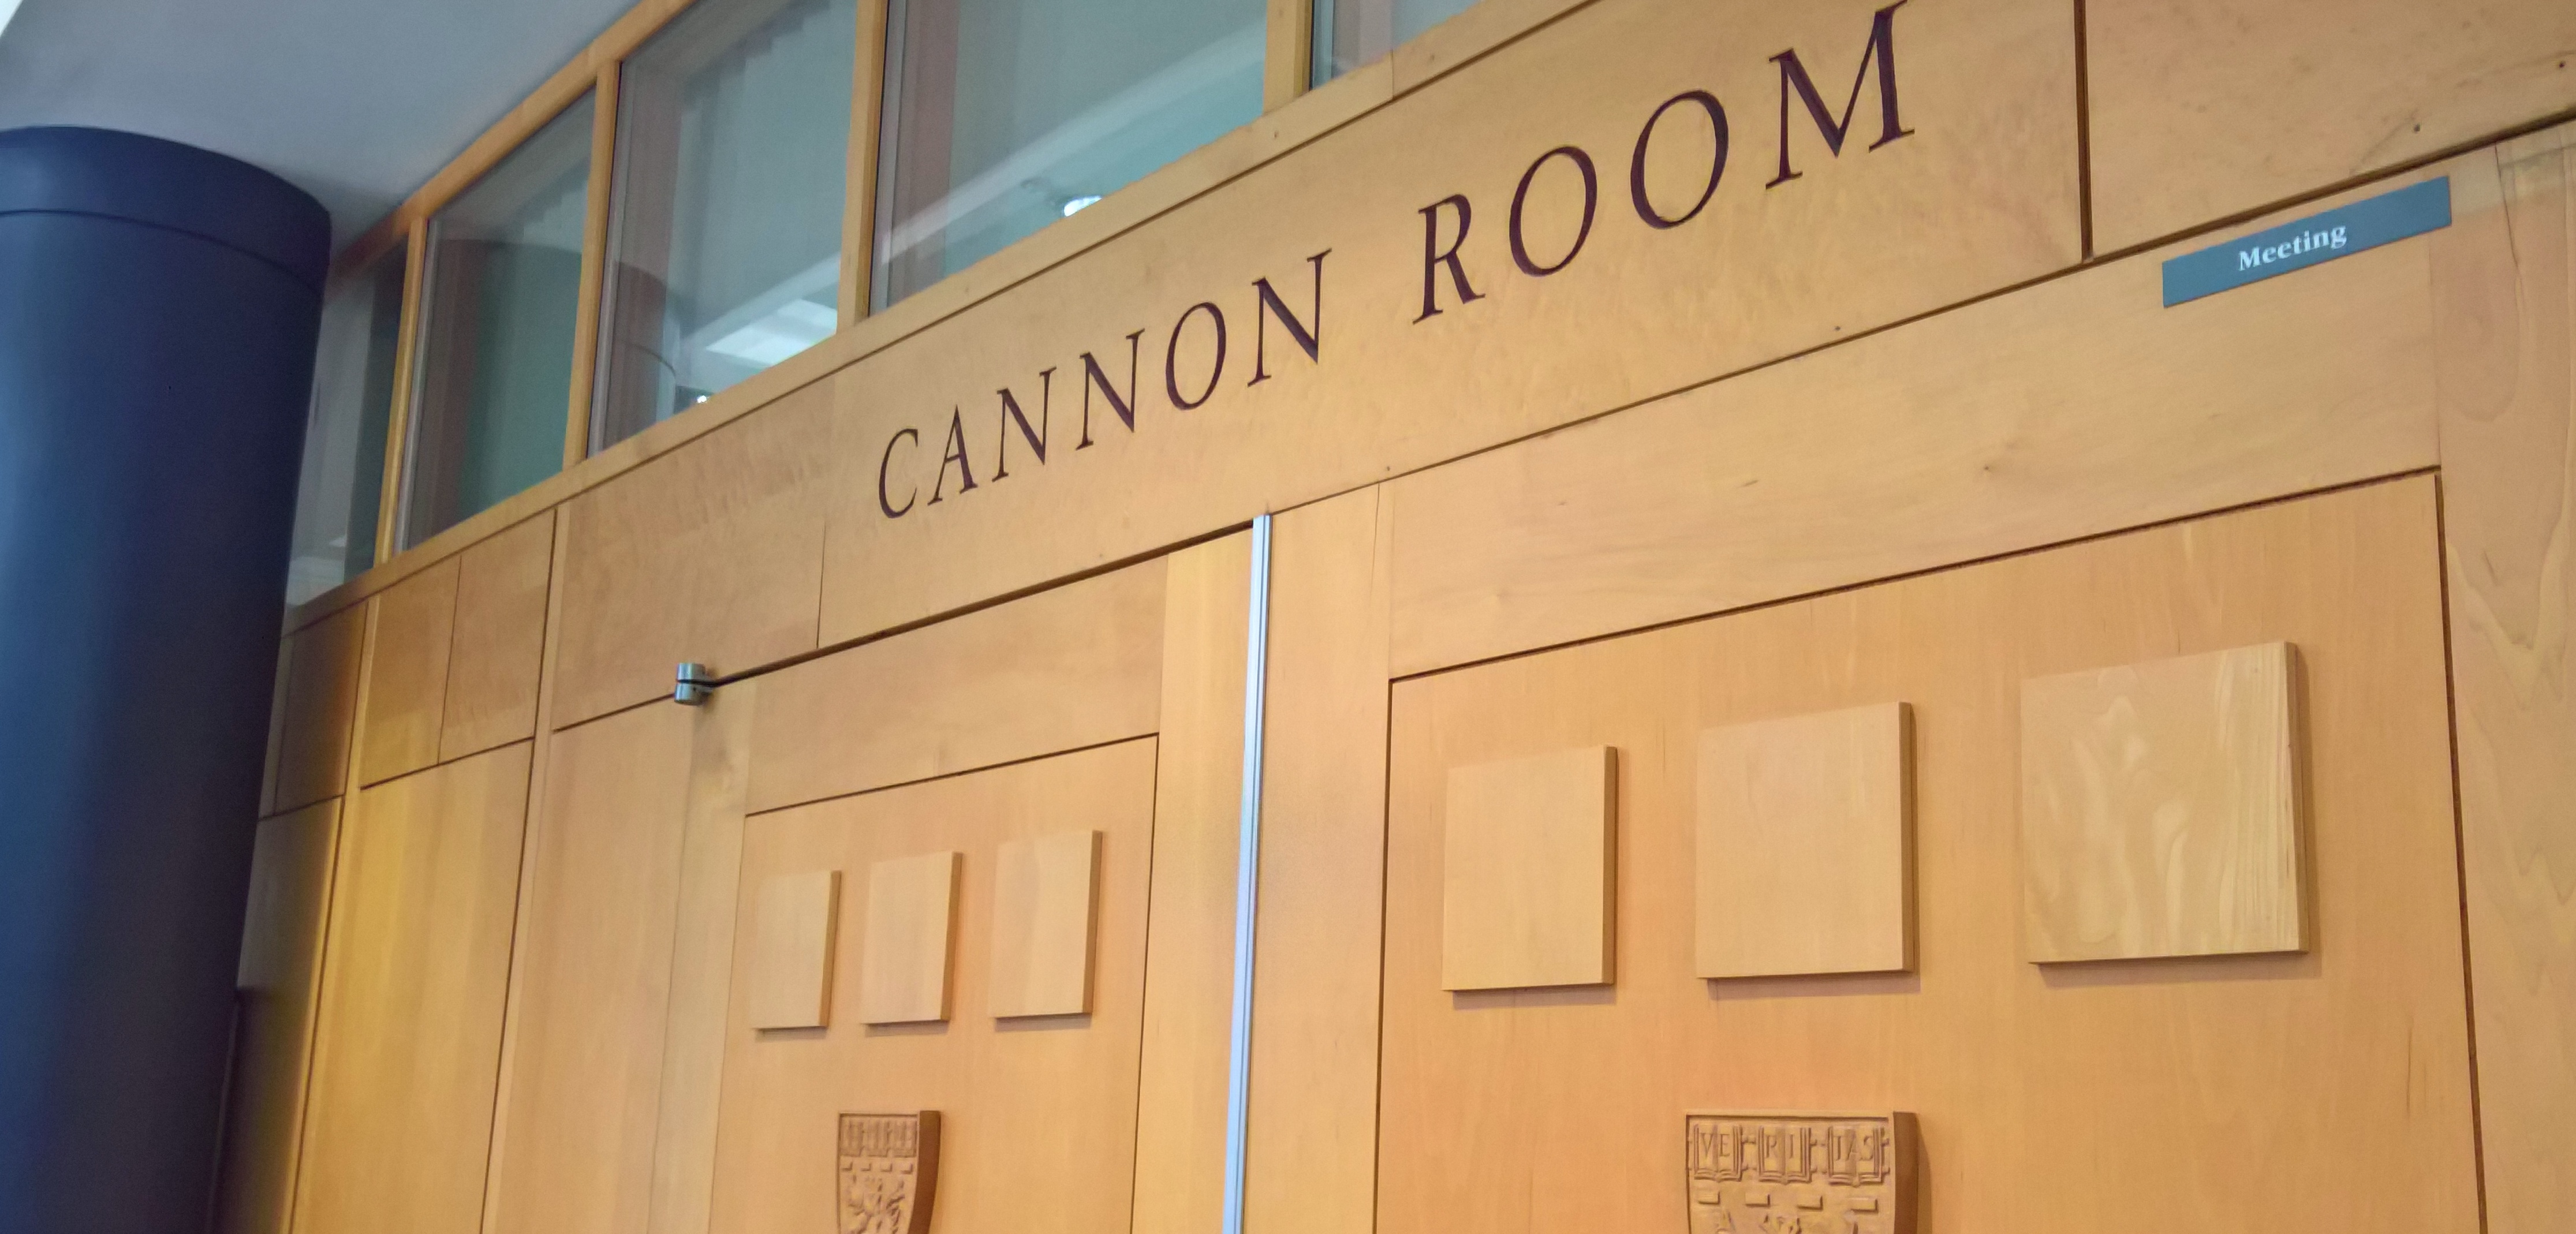 Image of Cannon Room entrance